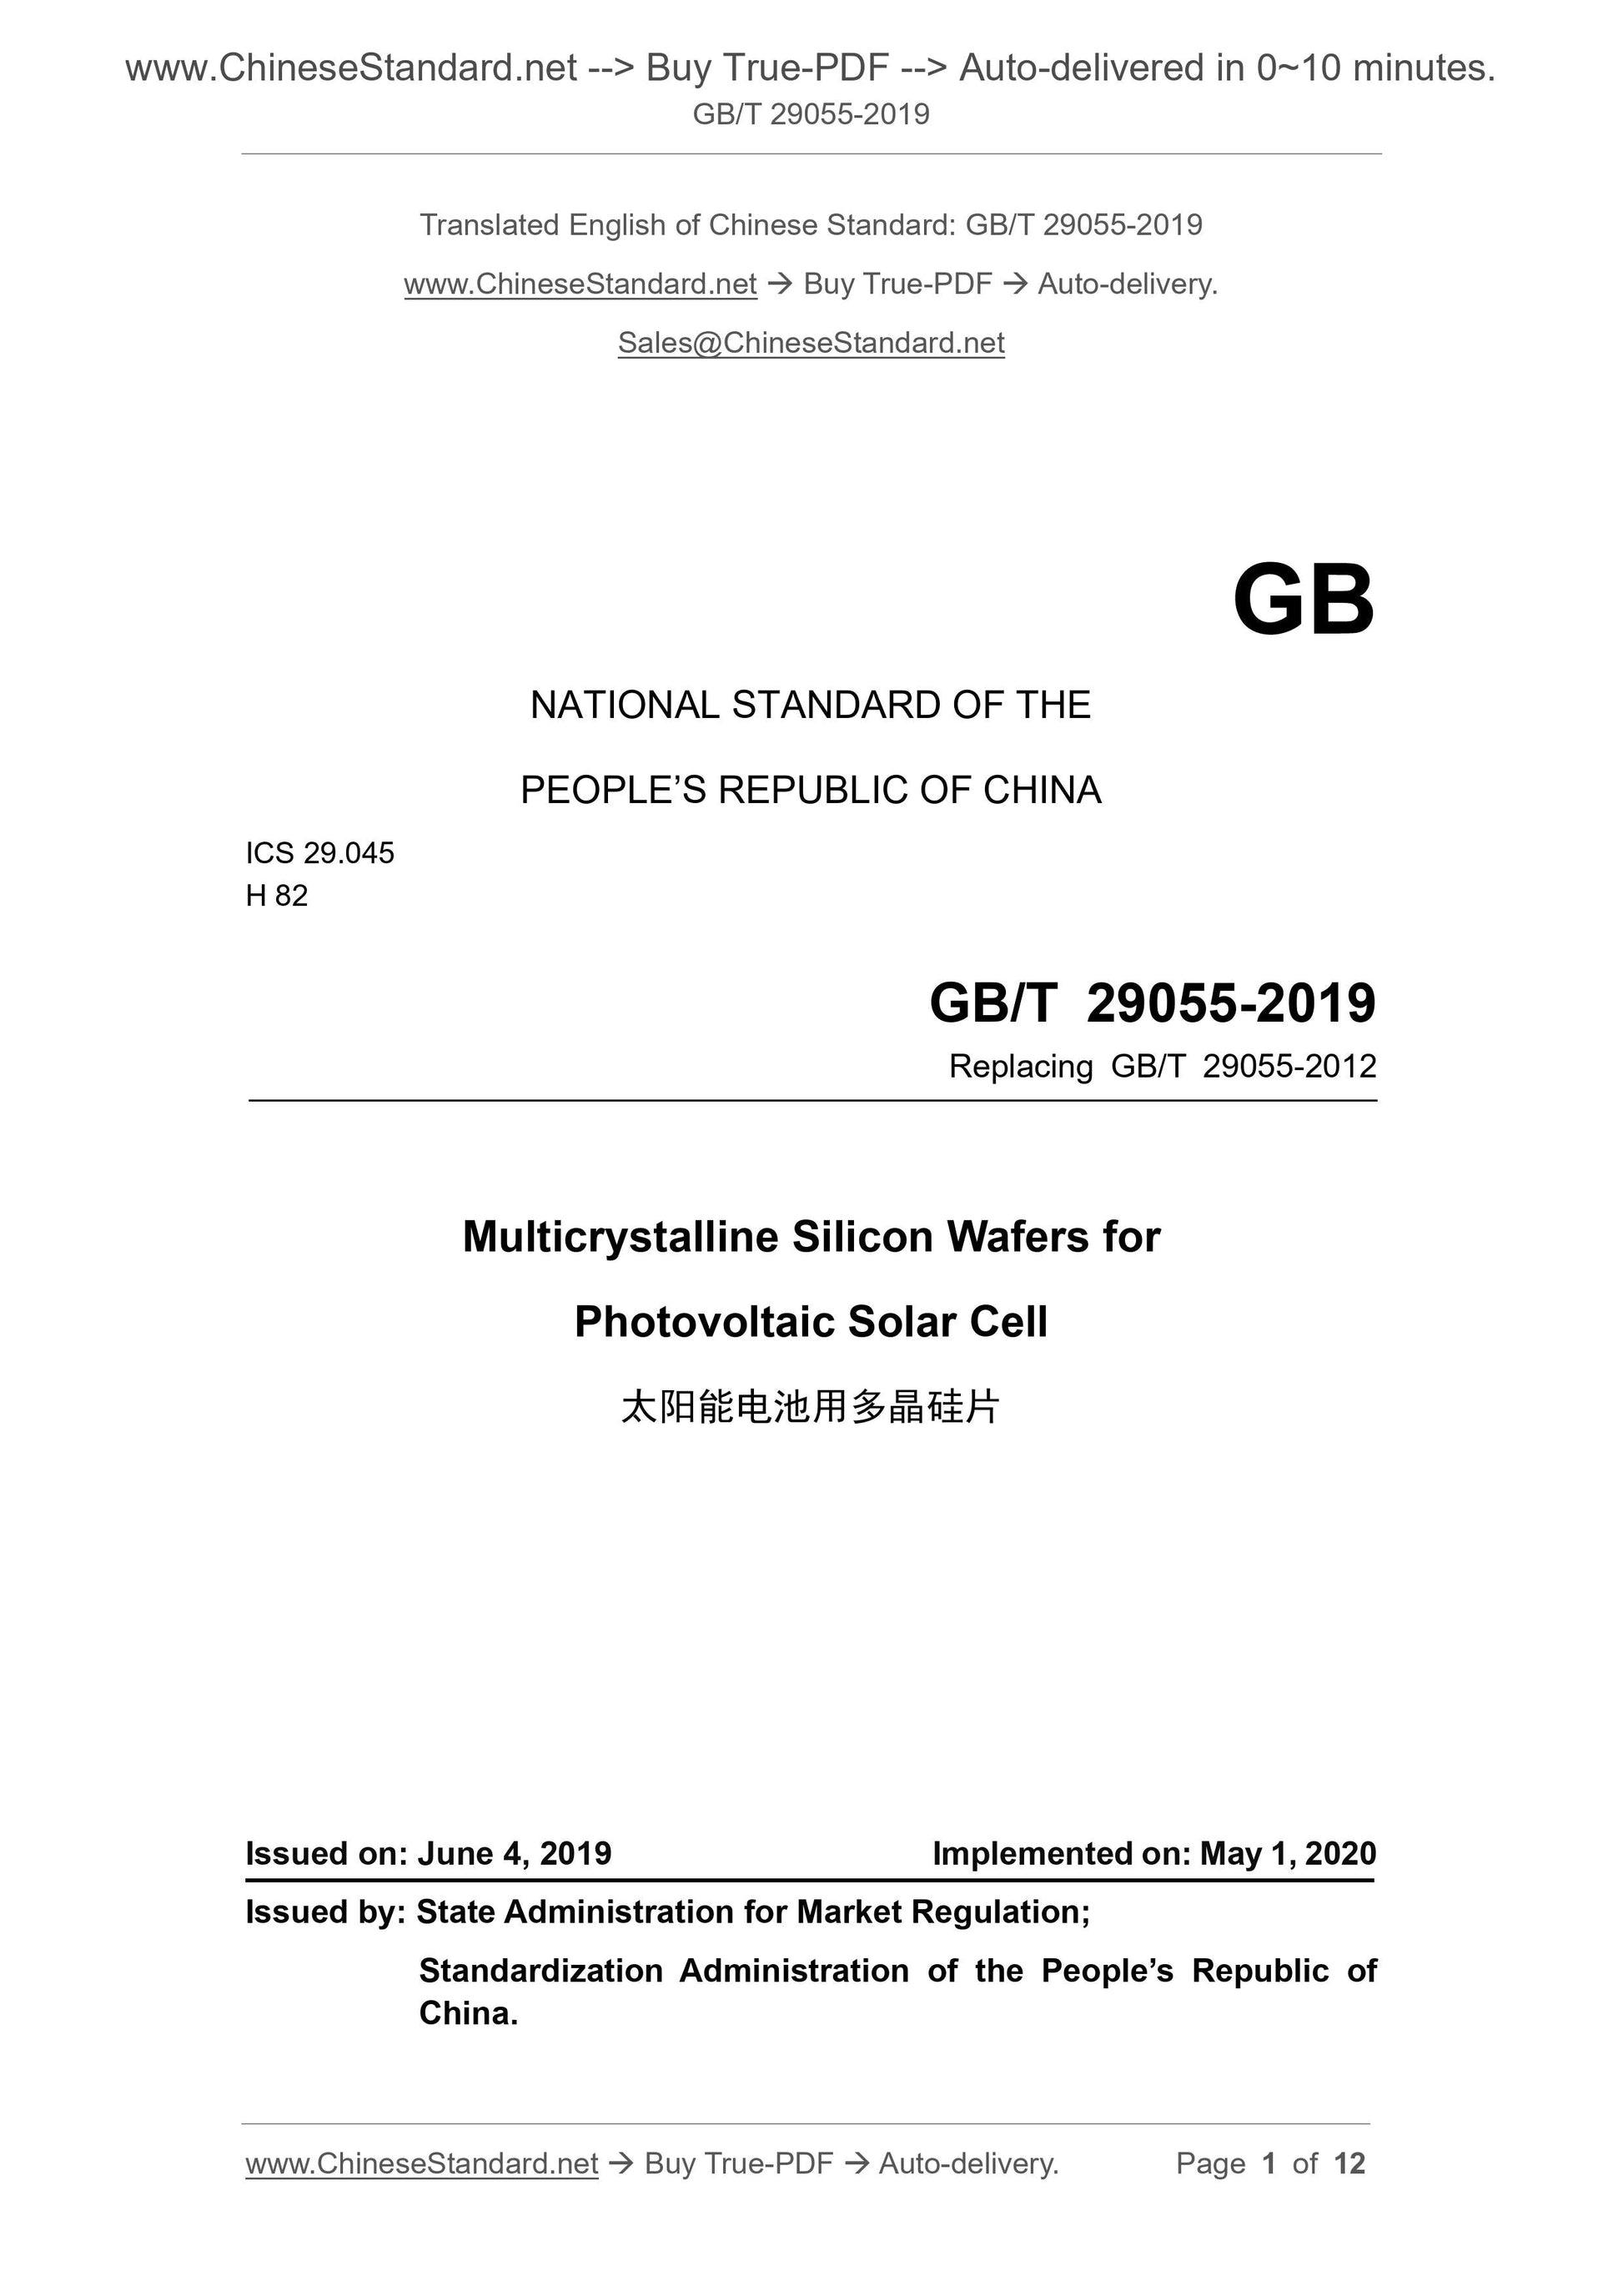 GB/T 29055-2019 Page 1